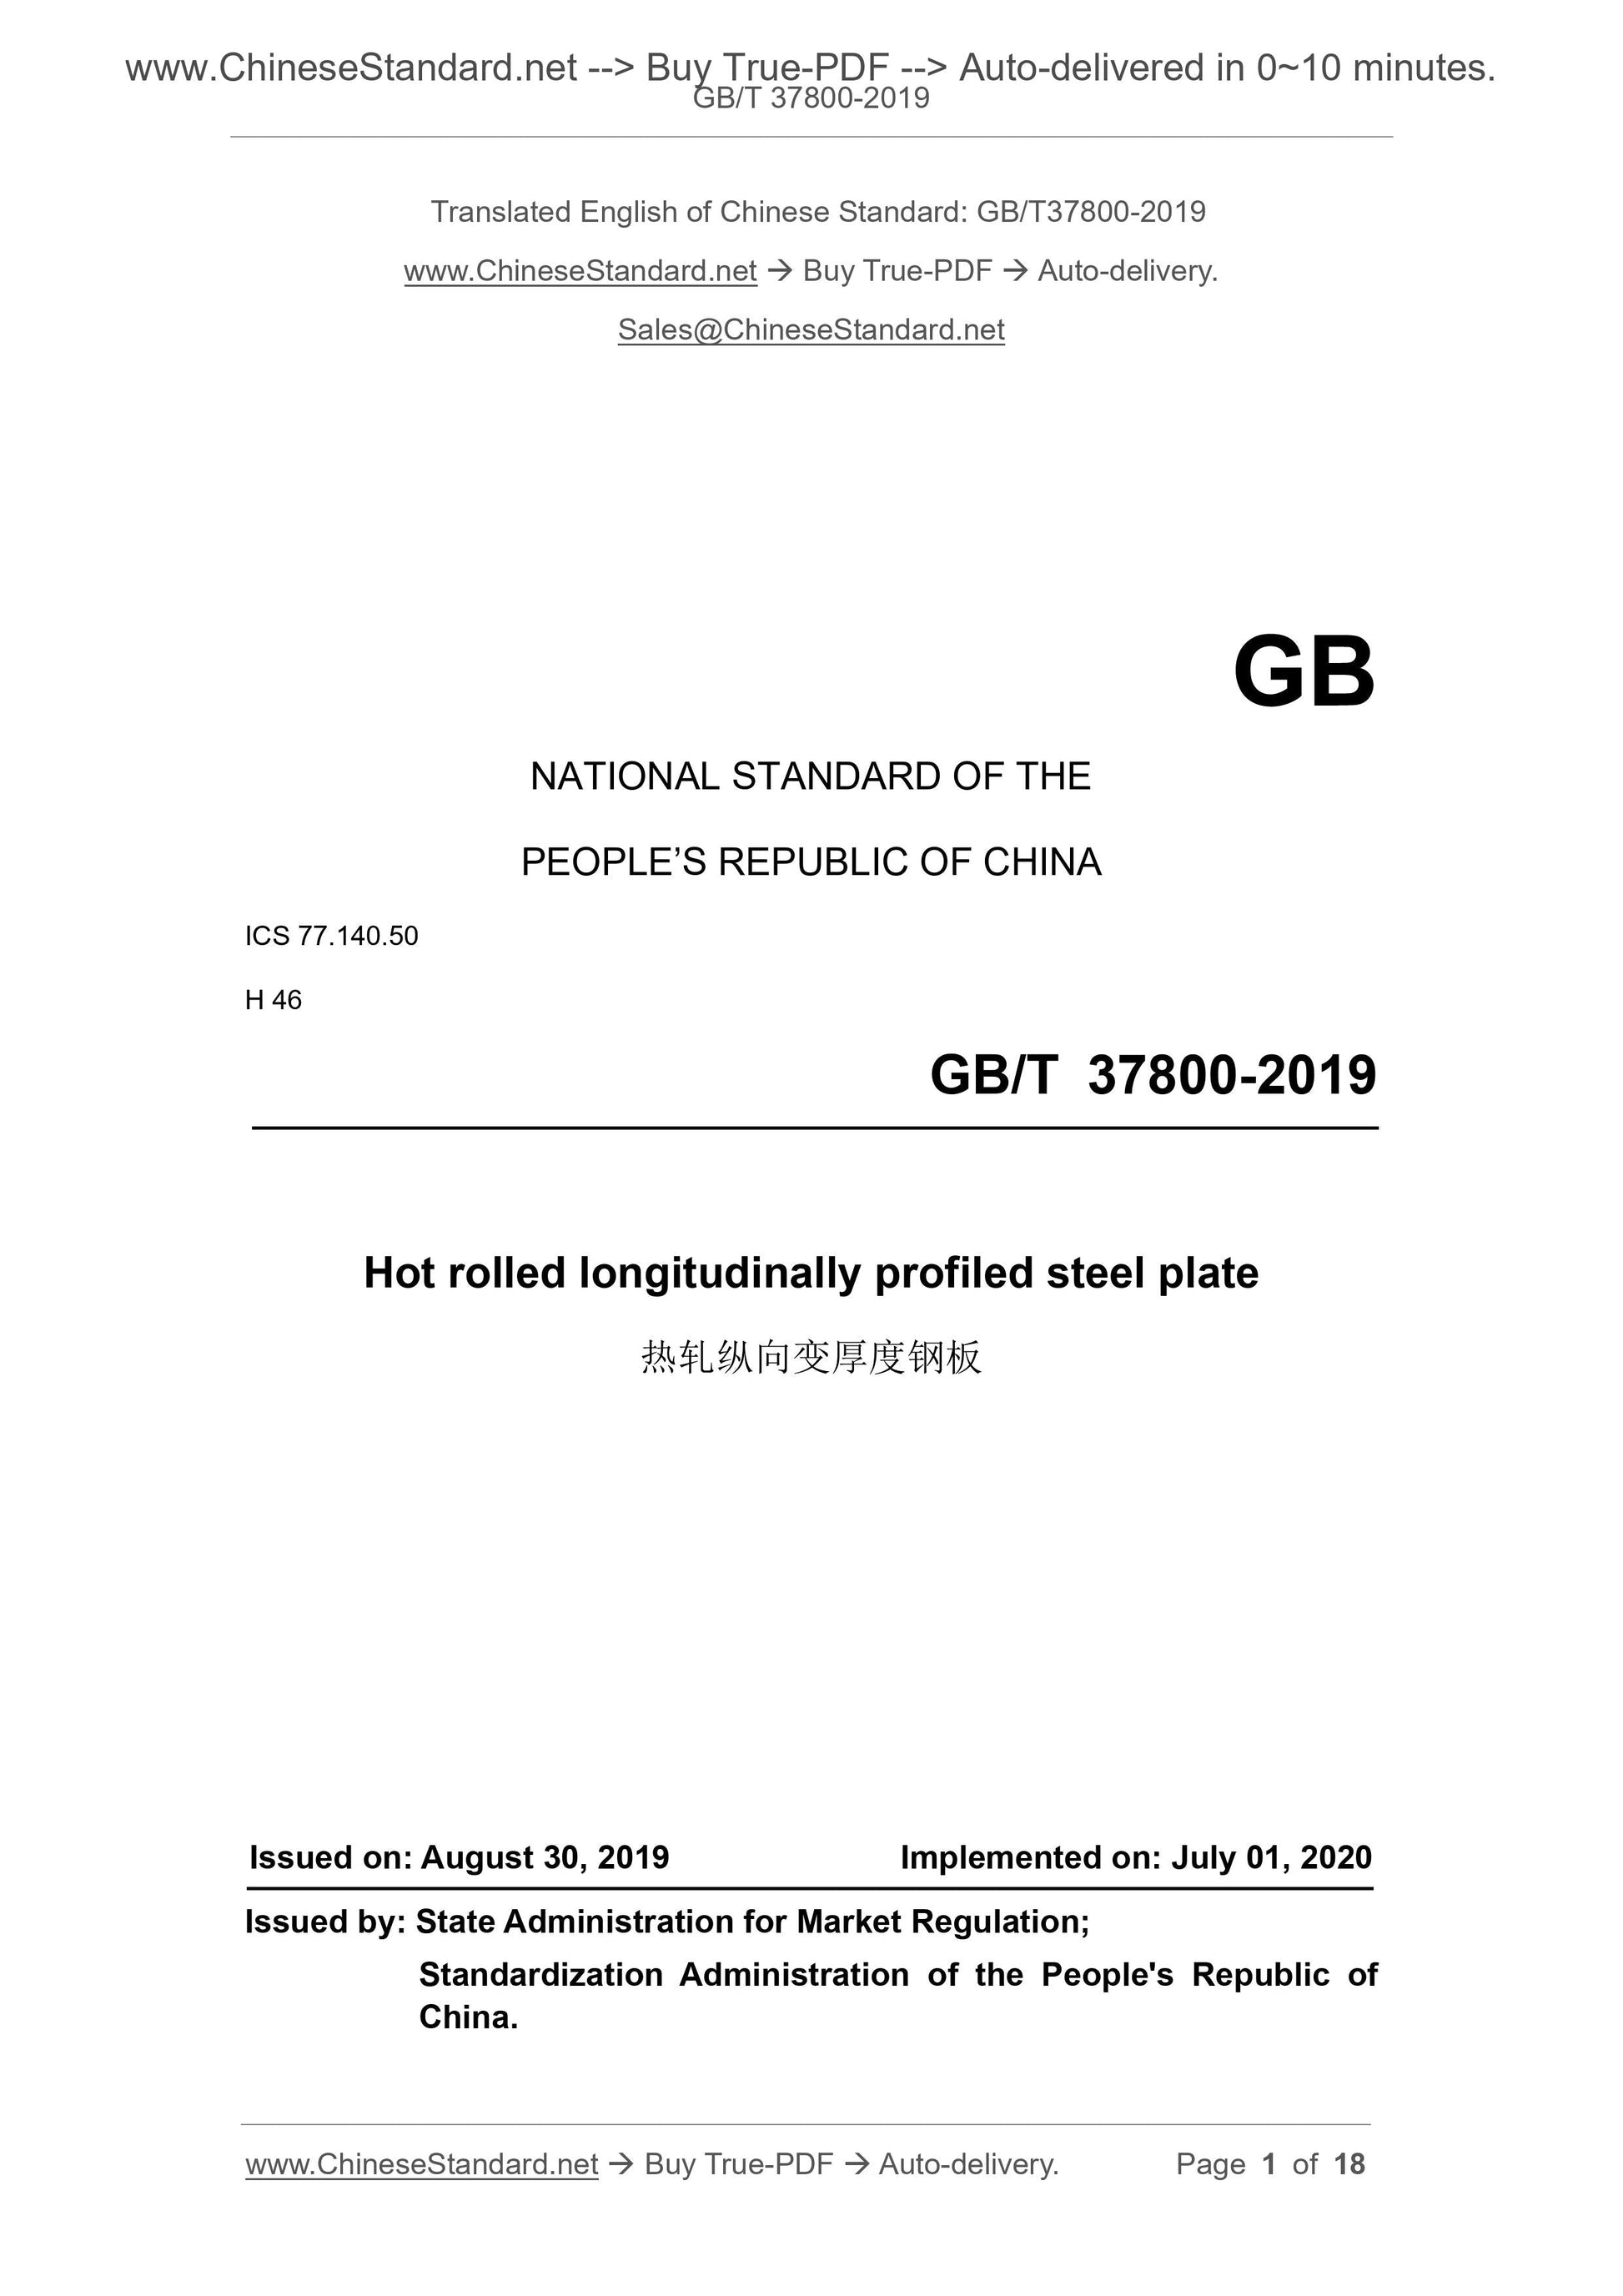 GB/T 37800-2019 Page 1